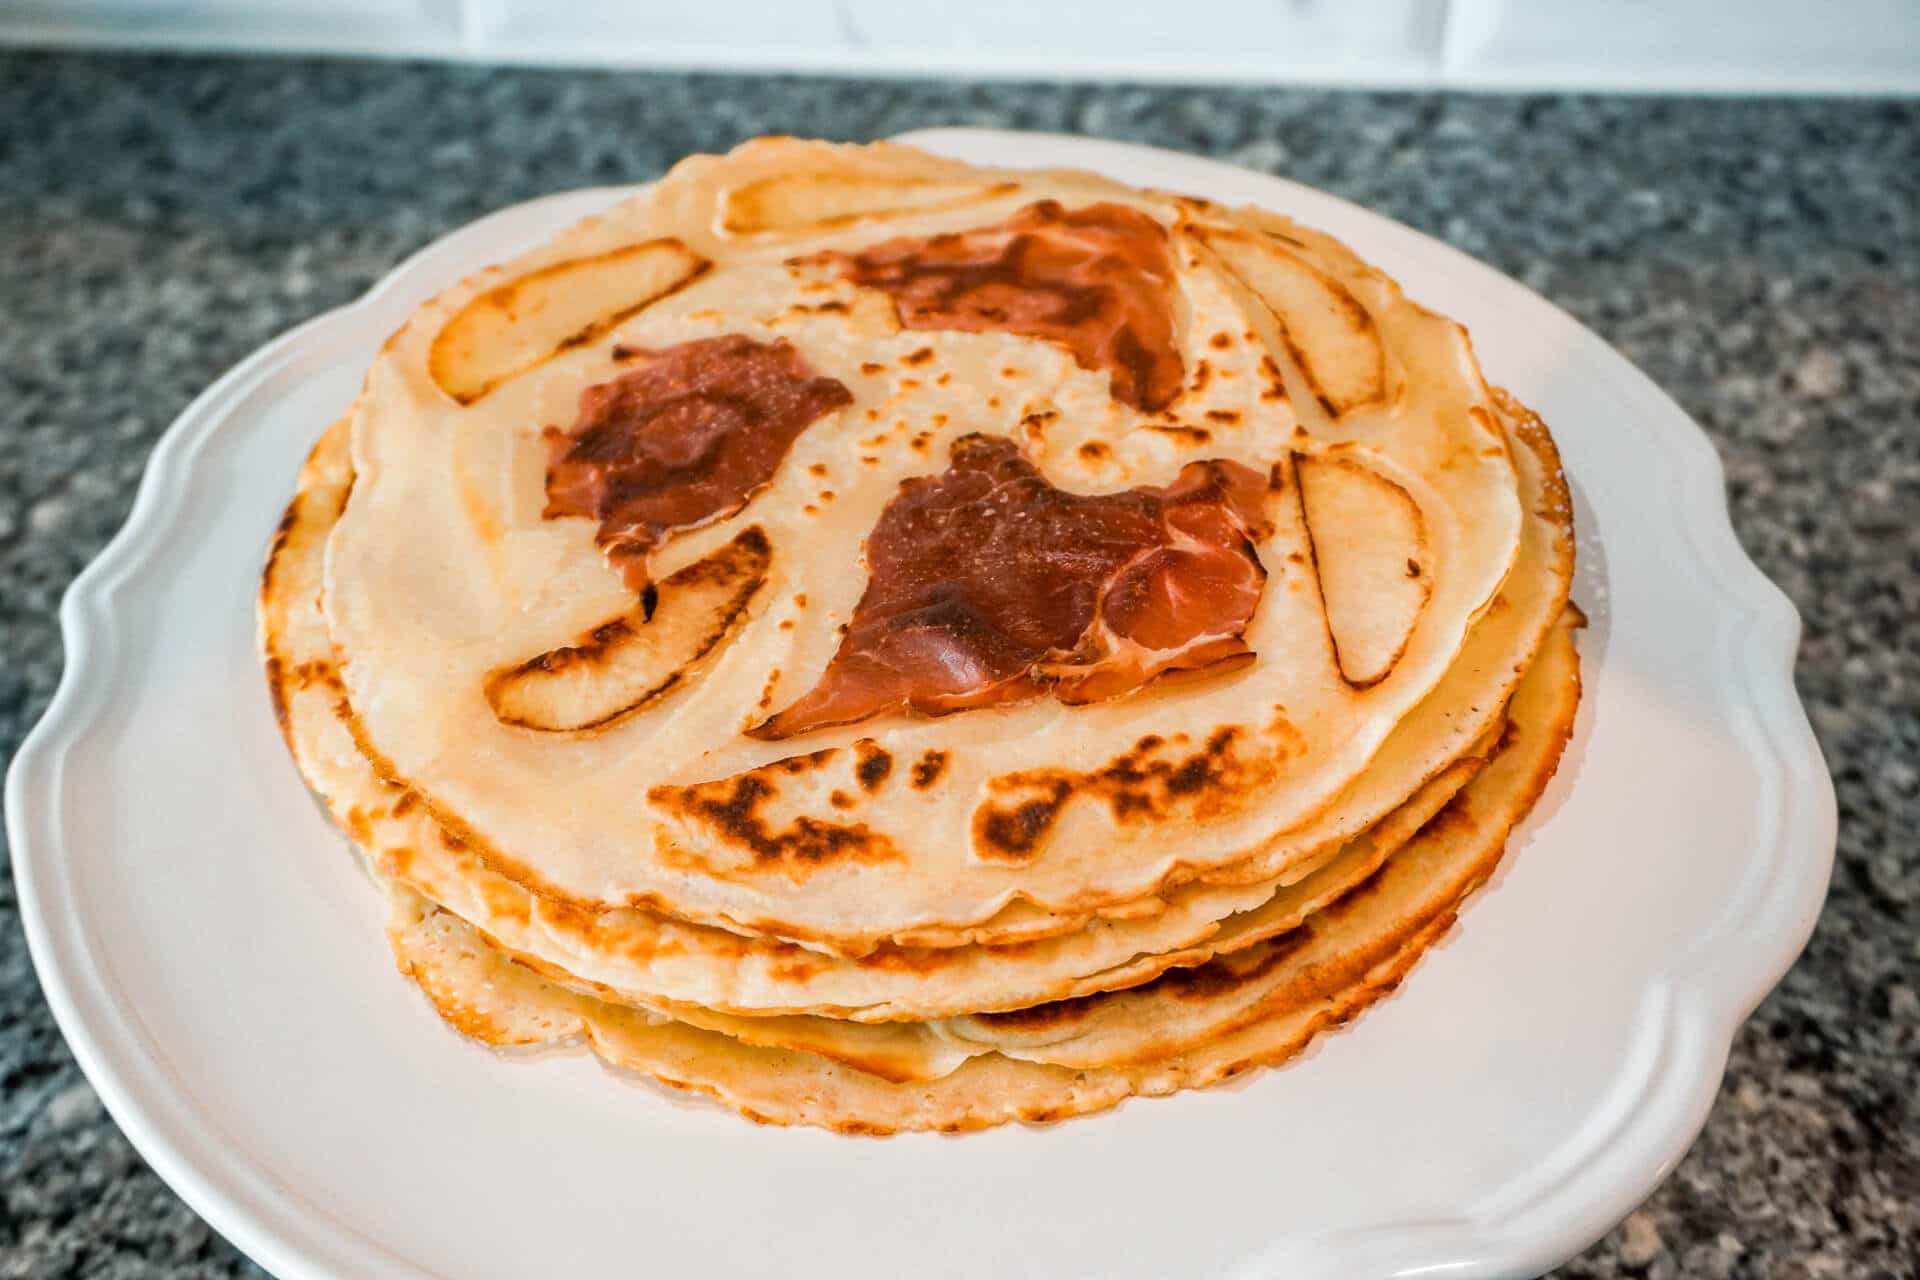 https://www.oursweetadventures.com/wp-content/uploads/2020/08/Stack-of-Dutch-Pancakes.jpg